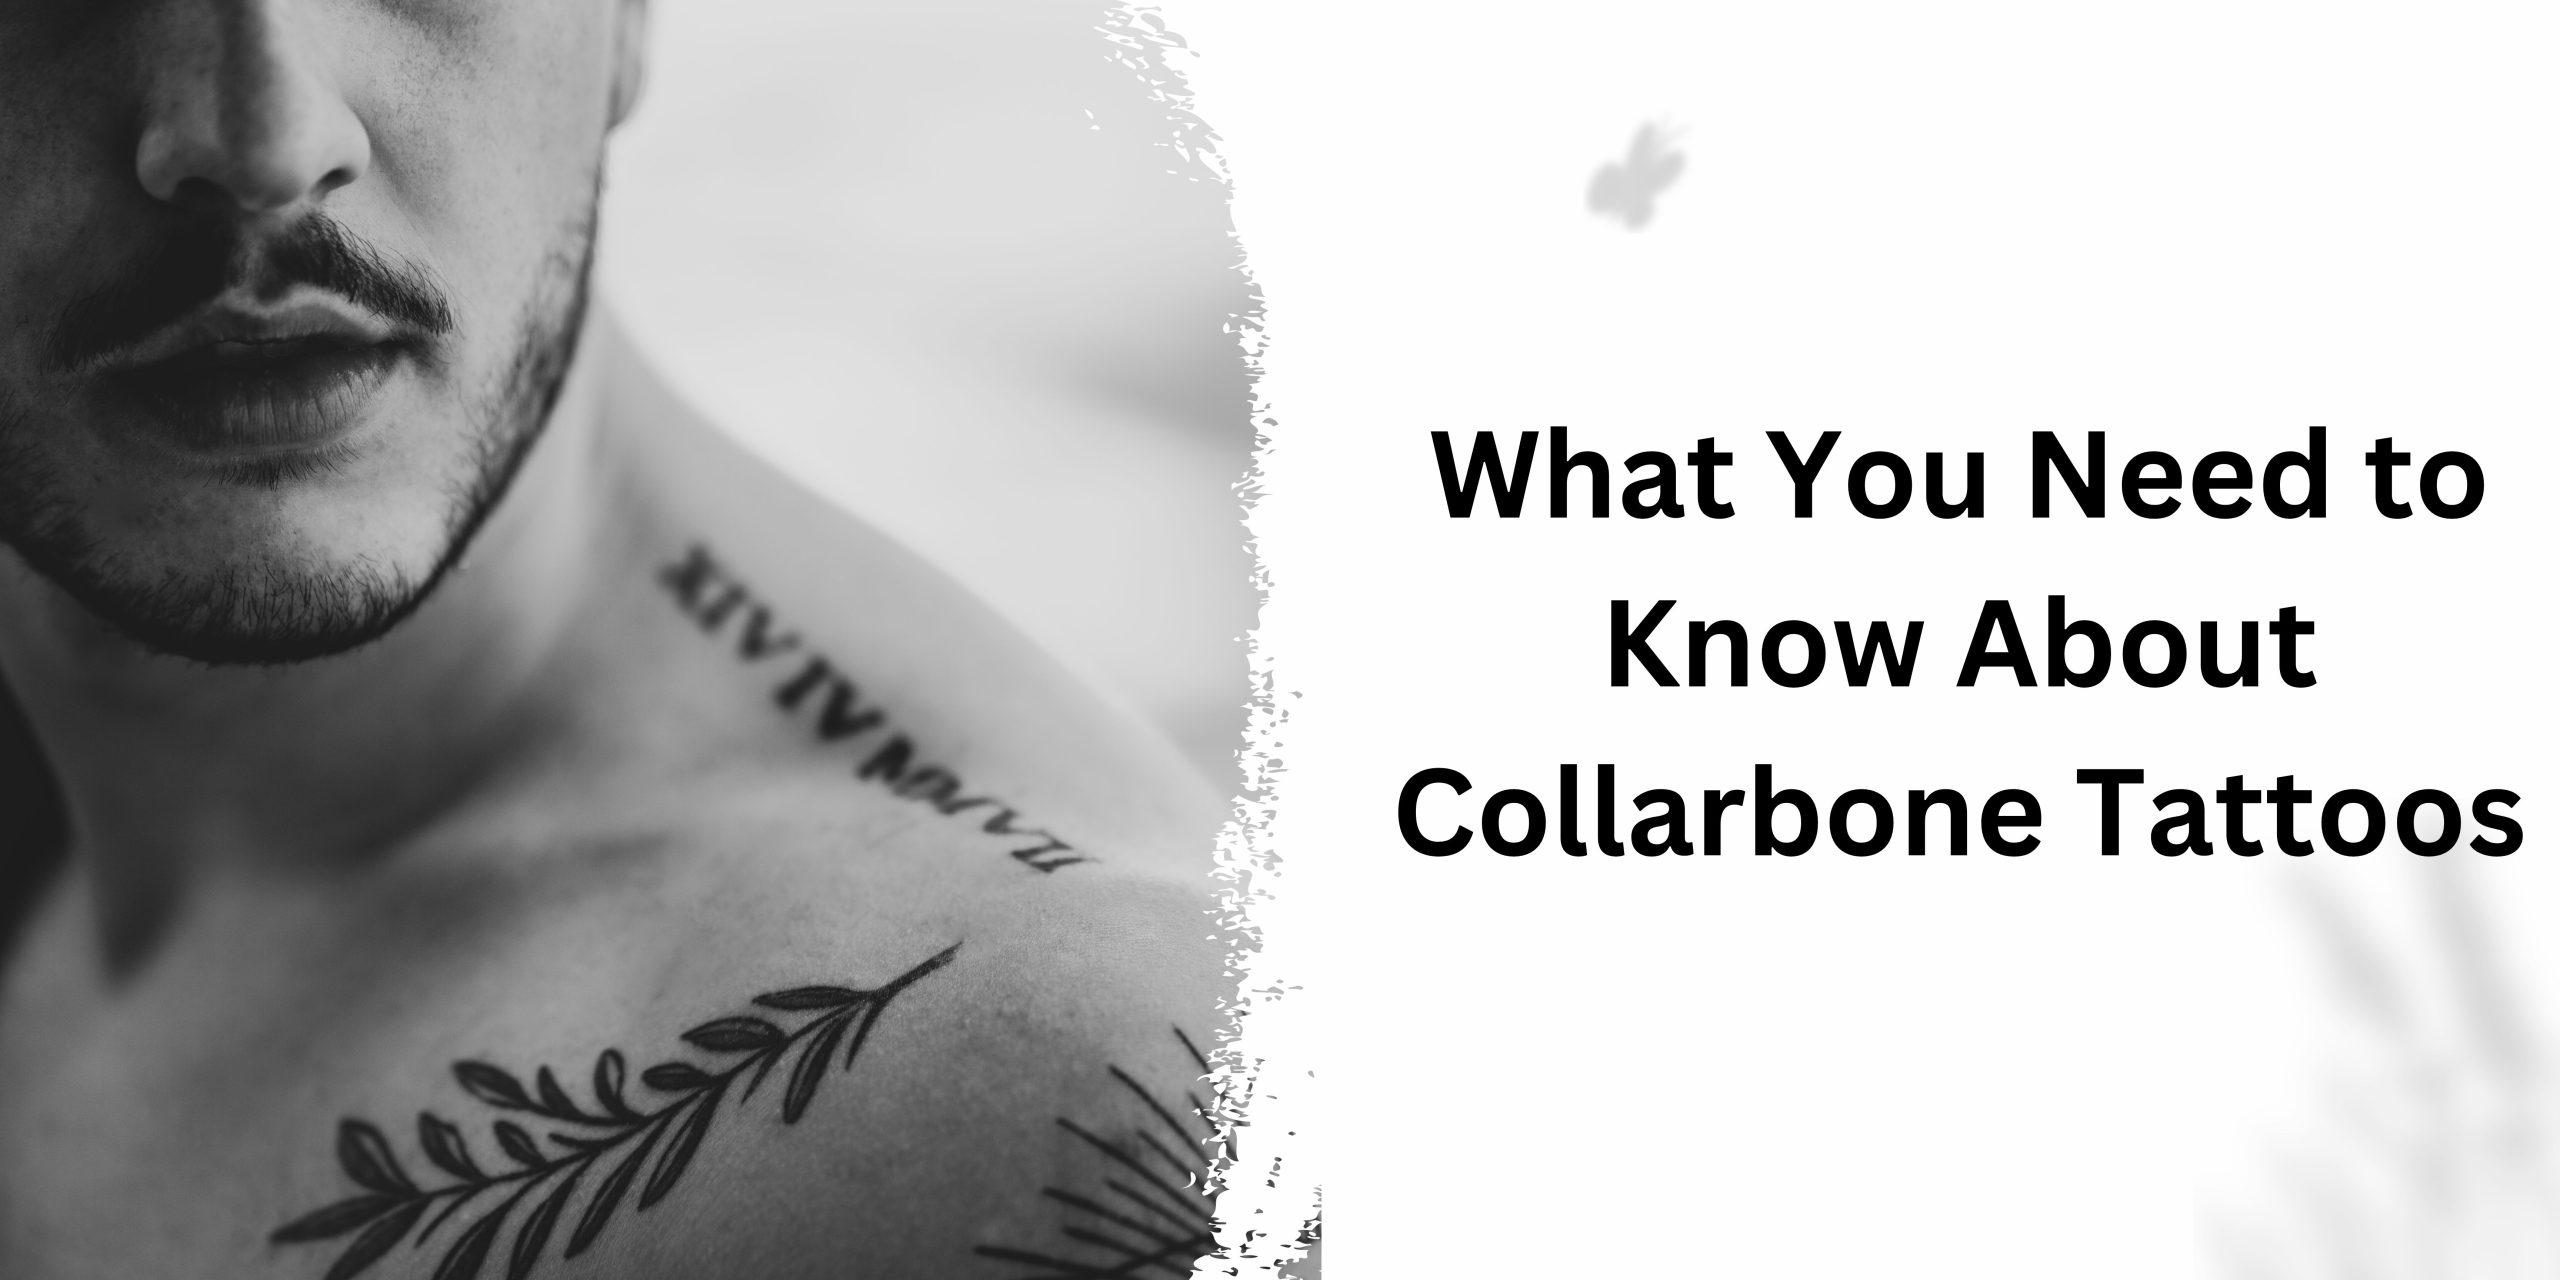 What You Need to Know About Collarbone Tattoos